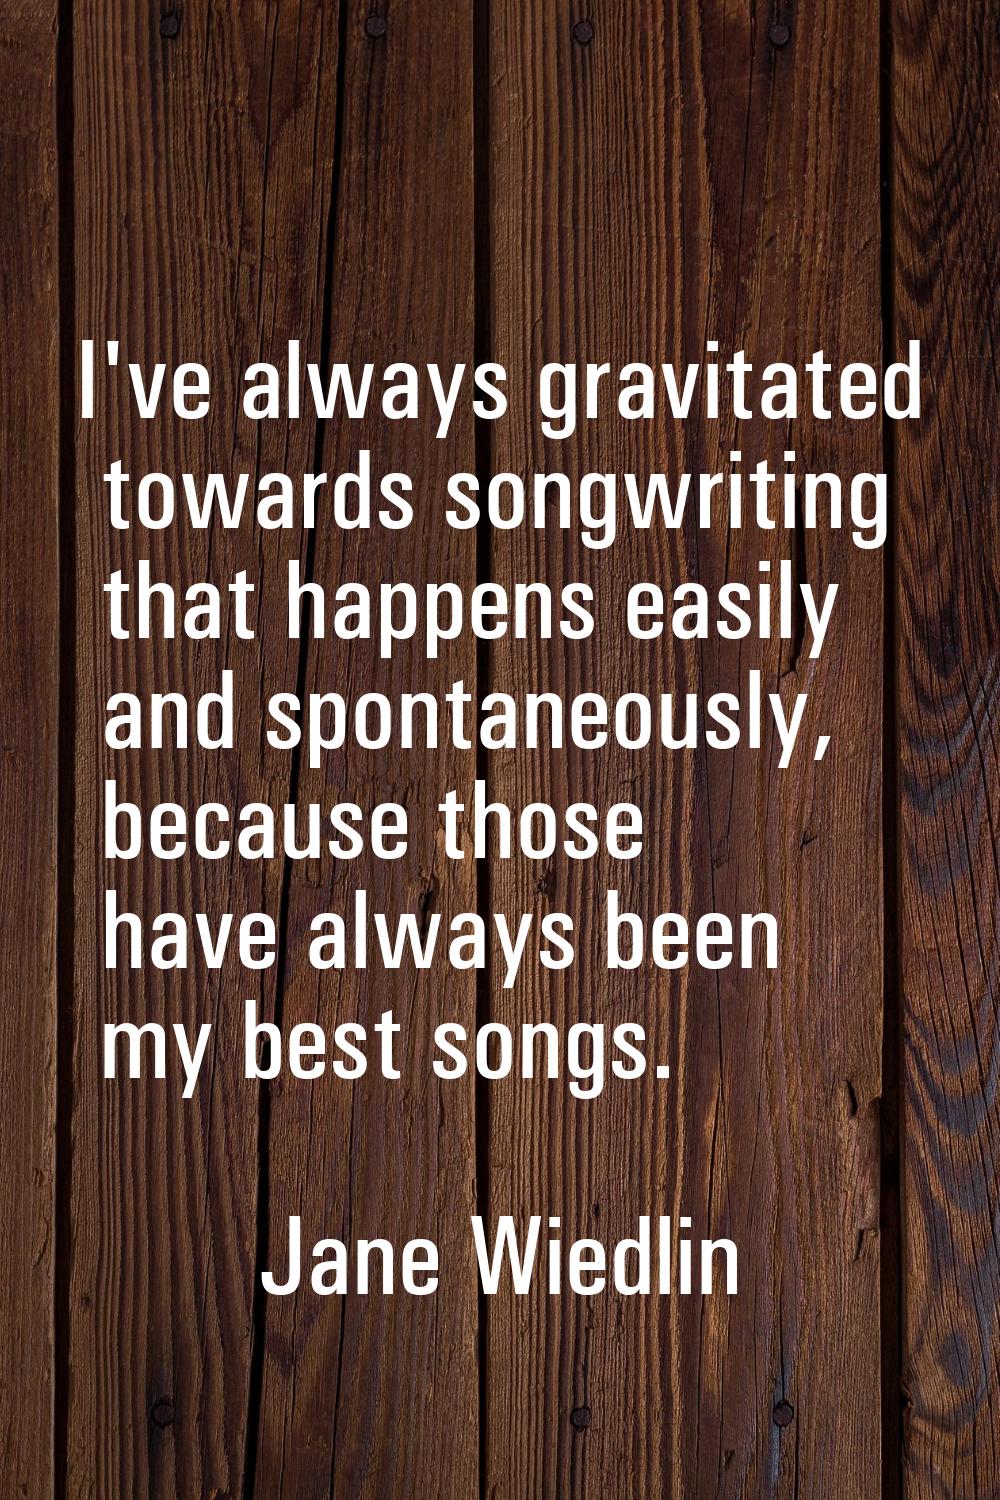 I've always gravitated towards songwriting that happens easily and spontaneously, because those hav